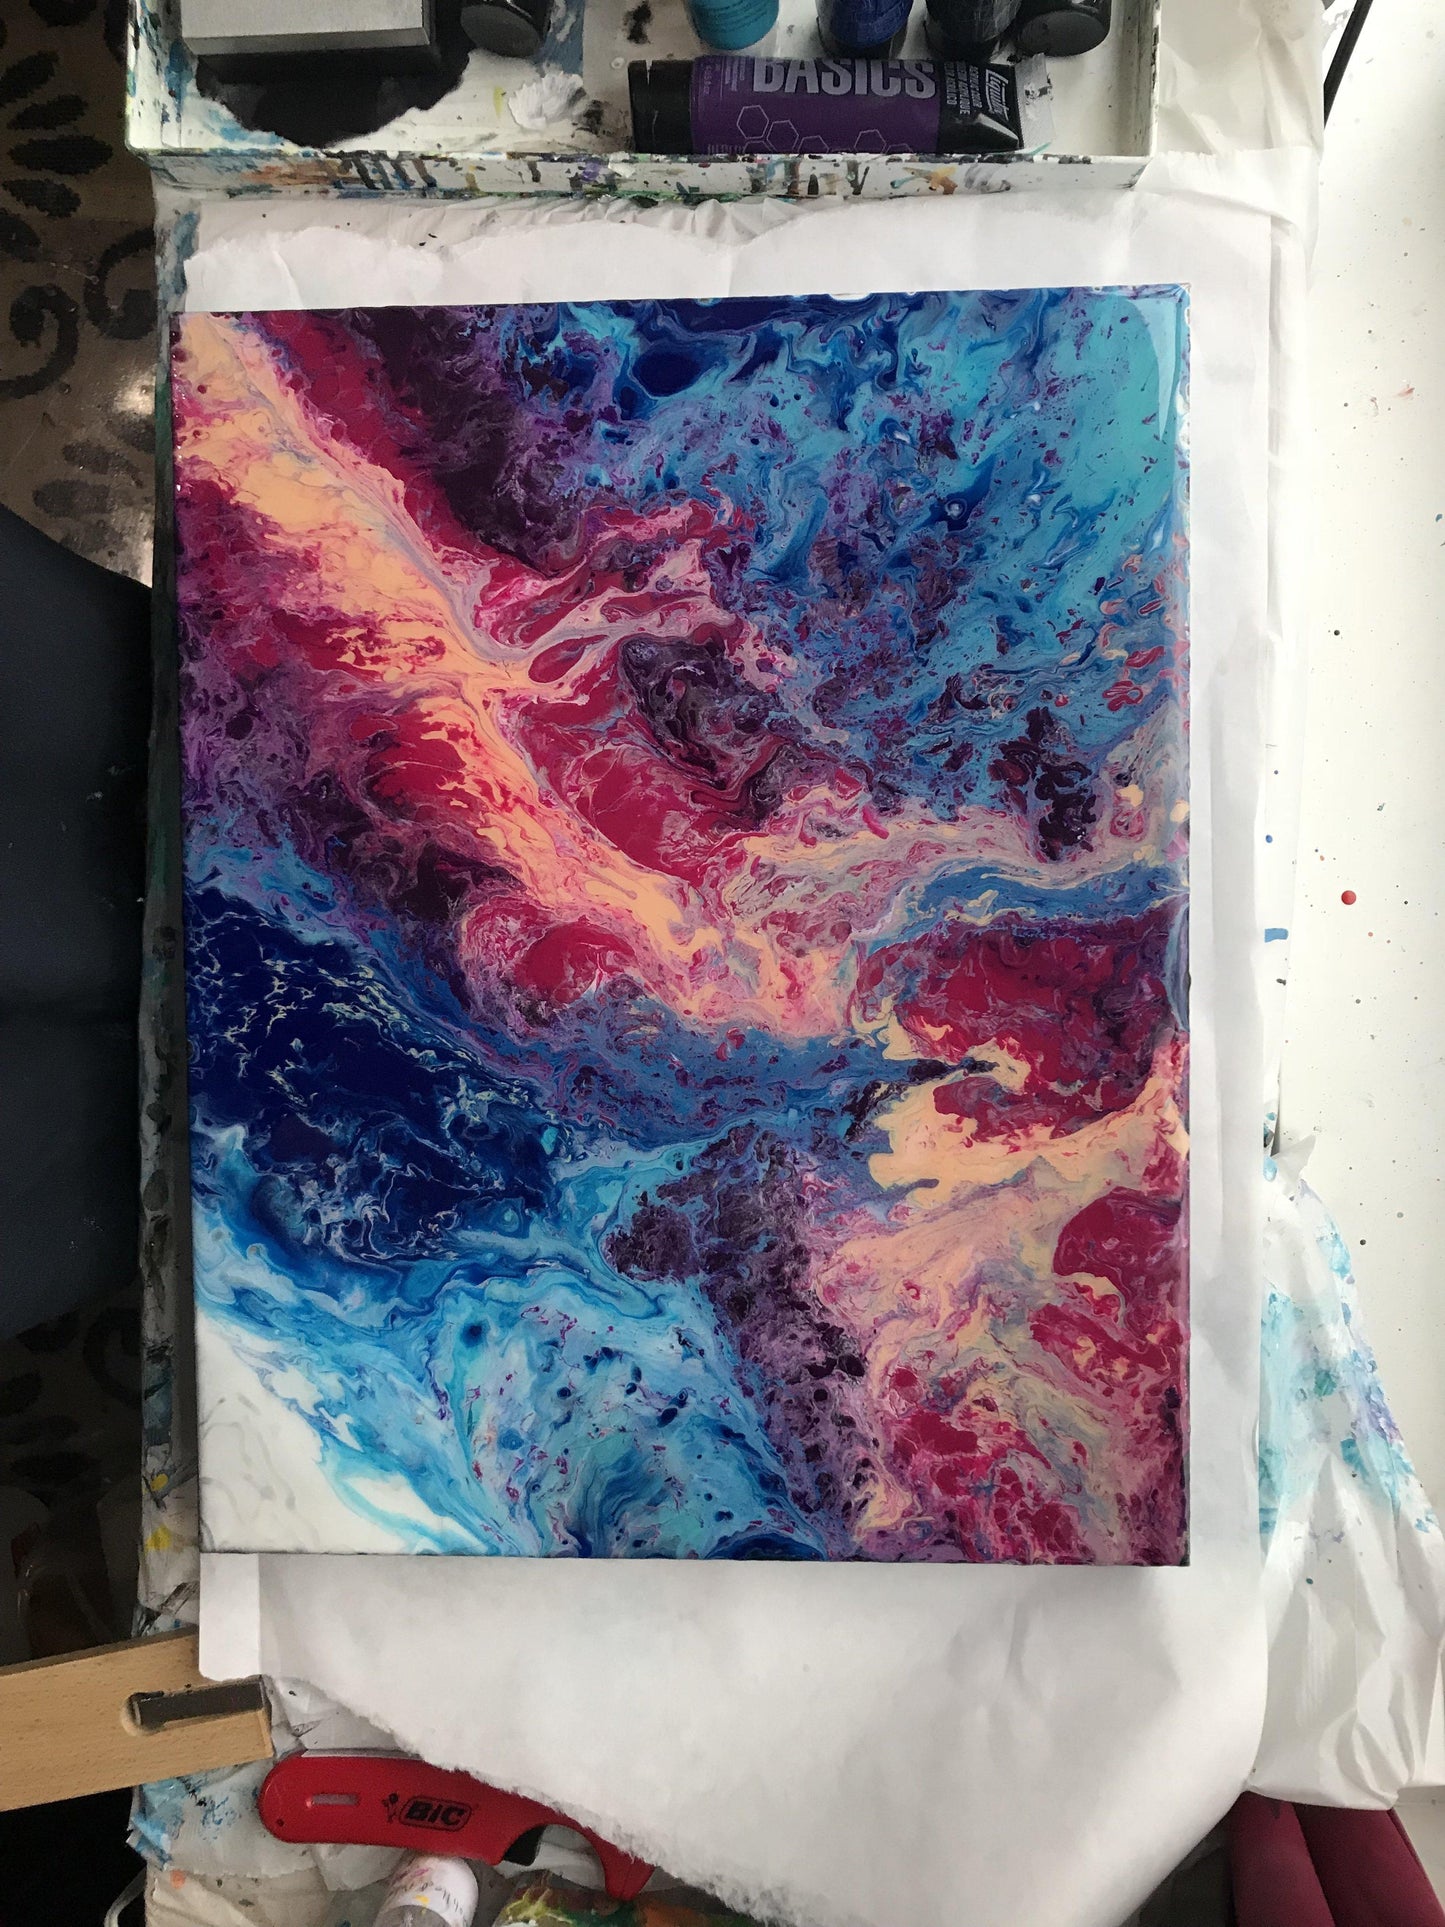 Fluid Art Original Acrylic Painting with Resin in Blue, Magenta and White. Glossy Brilliant Finish